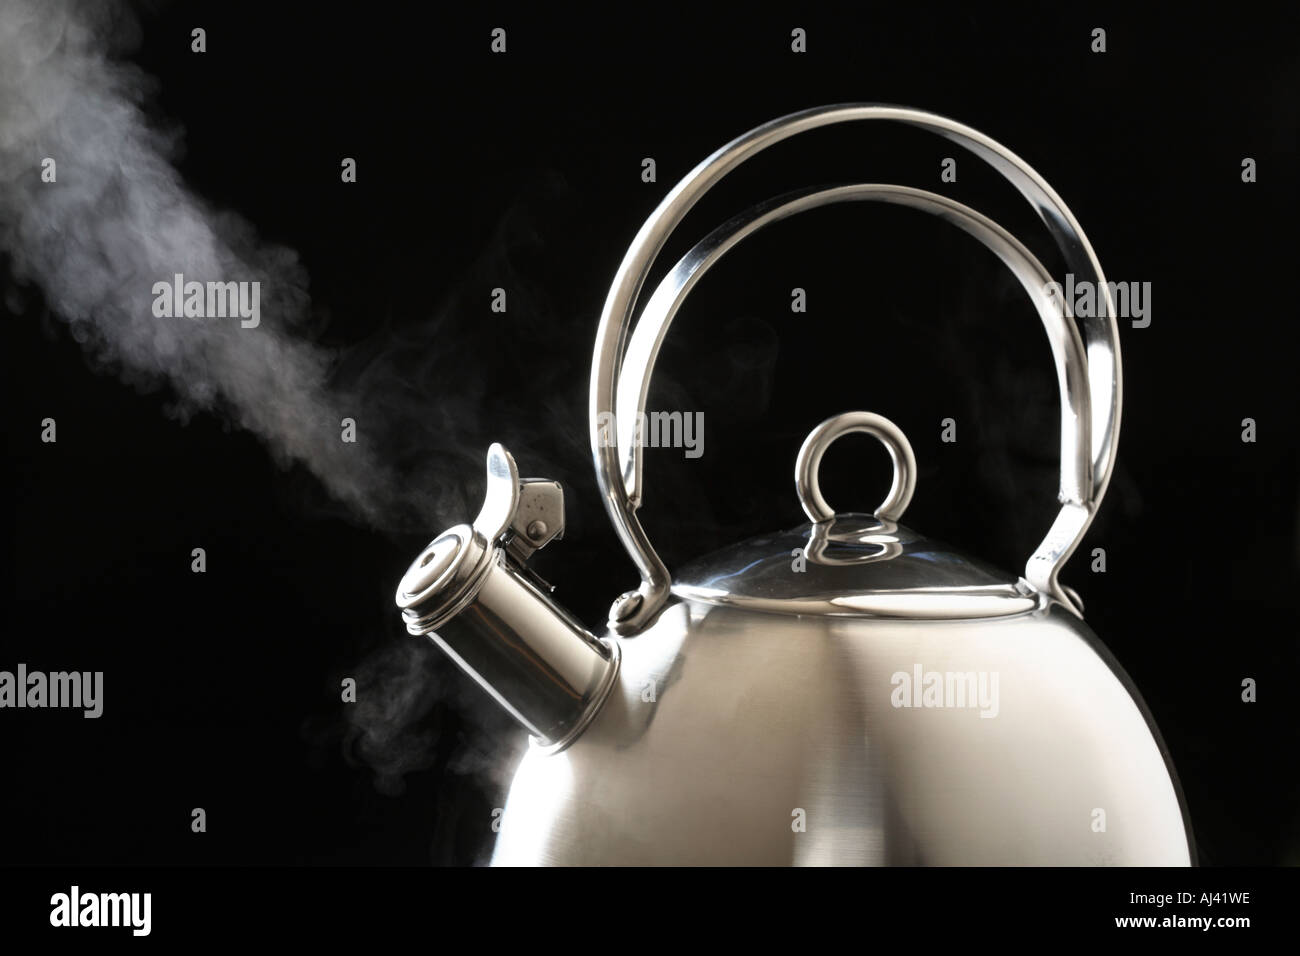 Kettle boiling with steam Stock Photo